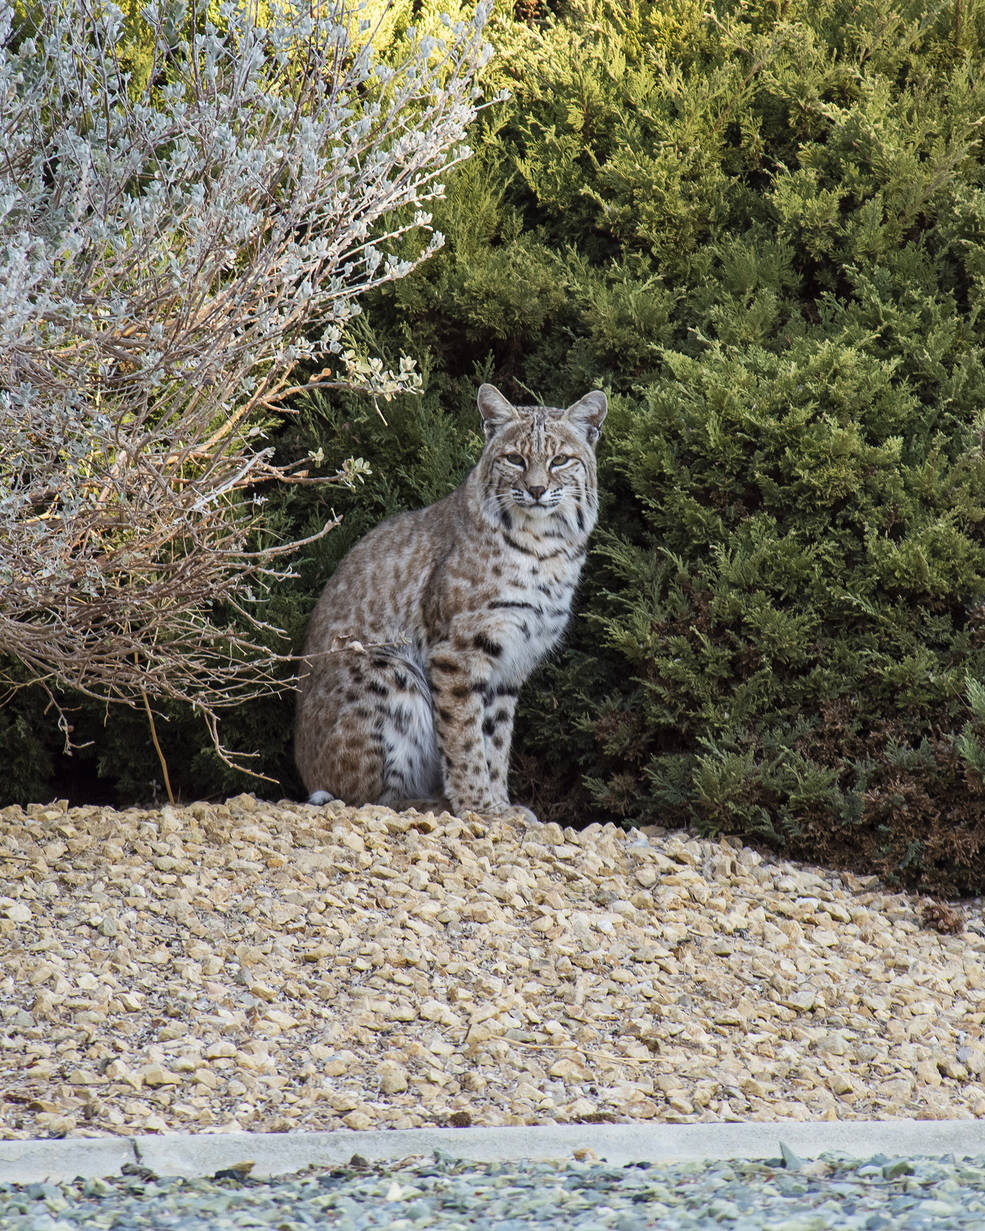 A bobcat seeking shade in the Mojave Desert at Armstrong Flight Research Center in Edwards, California.